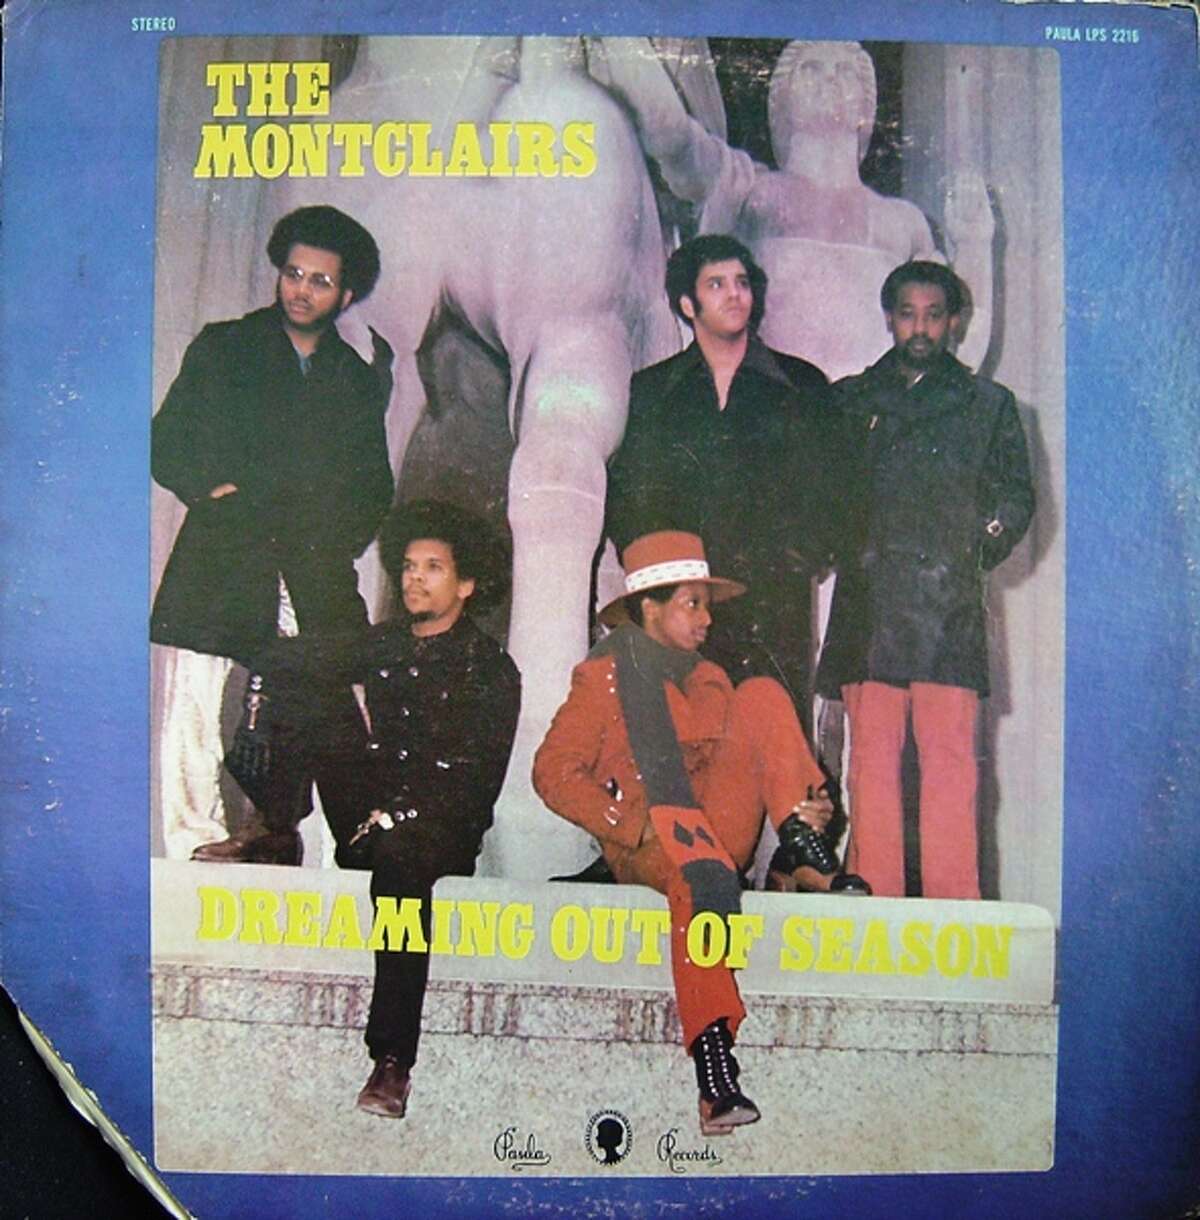 The Montclairs' only album, "Dreaming Out of Season," produced a number of chart-making R&B songs. Founding member David Frye, who grew up on Amelia Street in Alton, is now a pharmacist in St. Louis. The vocal group formed in East St. Louis, named after a brand of cigarettes. The group was made up of Frye, Phil Perry, George McLellan, Kevin Sanlin and Clifford “Scotty” Williams. Frye's older brother, Keith Frye, of Fort Lauderdale, Florida, produced the album and retired as vice president of Capital Records.  